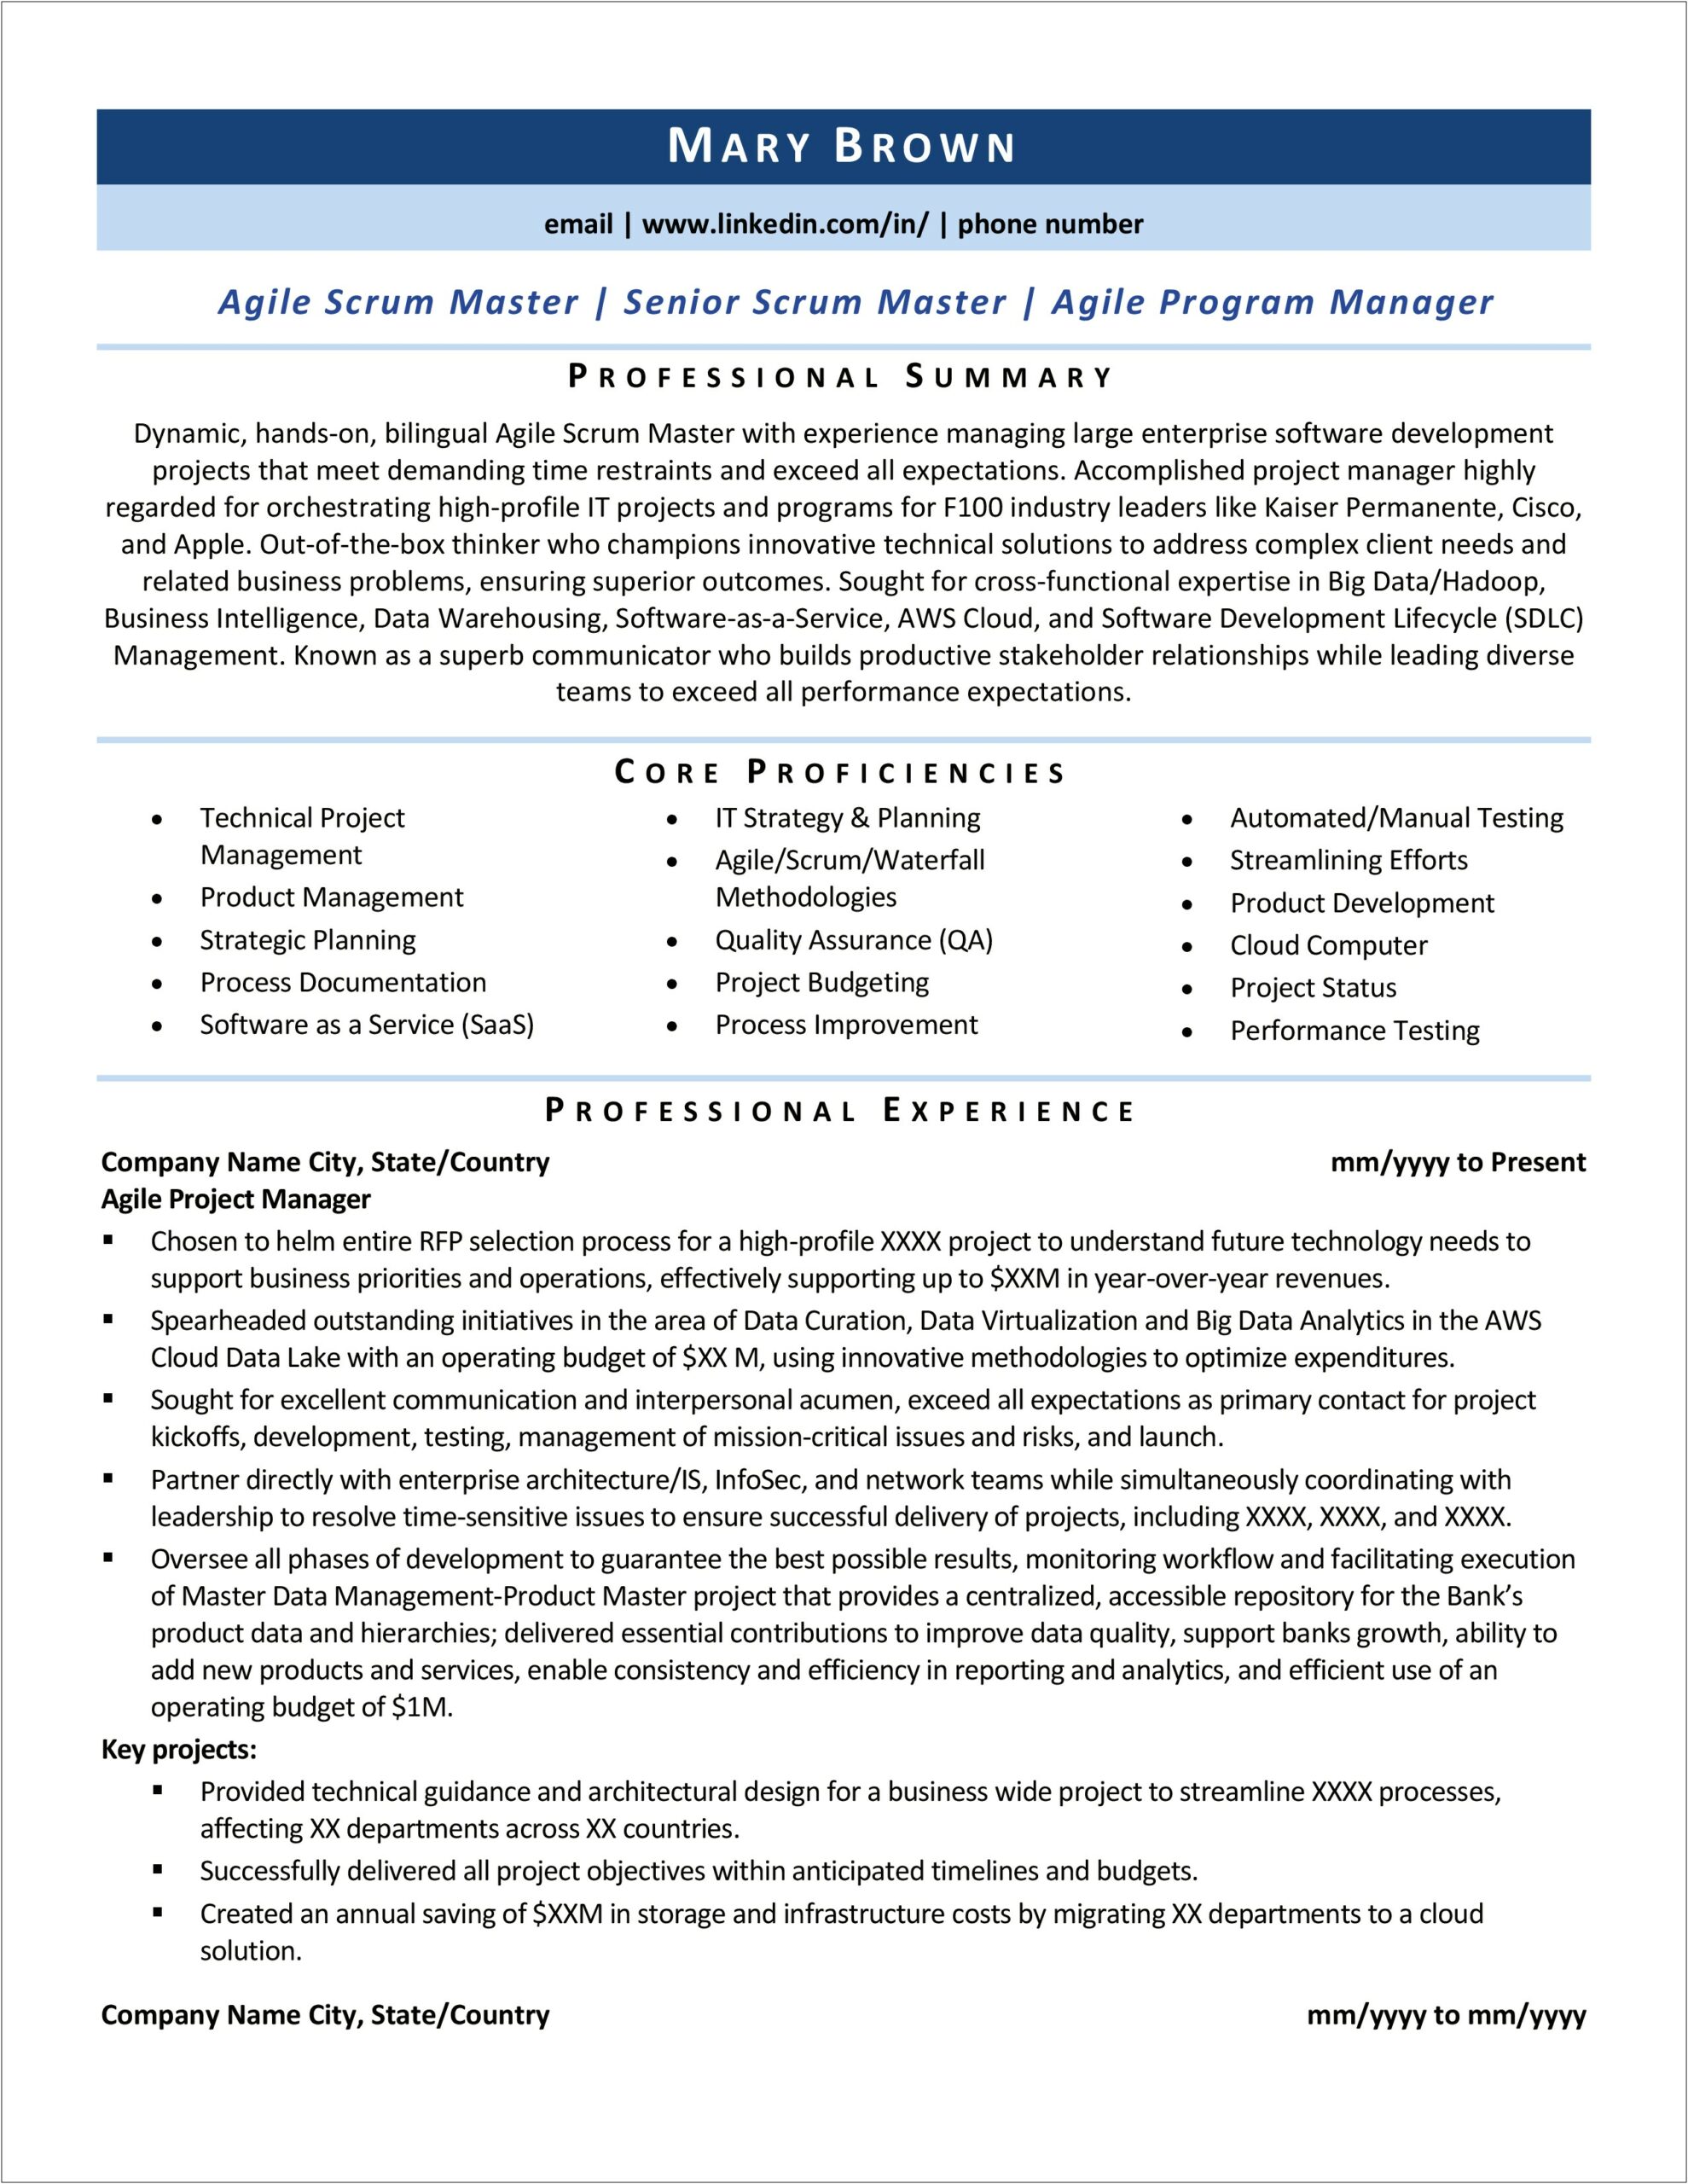 Resume Worked In An Agile Environment With Scrum